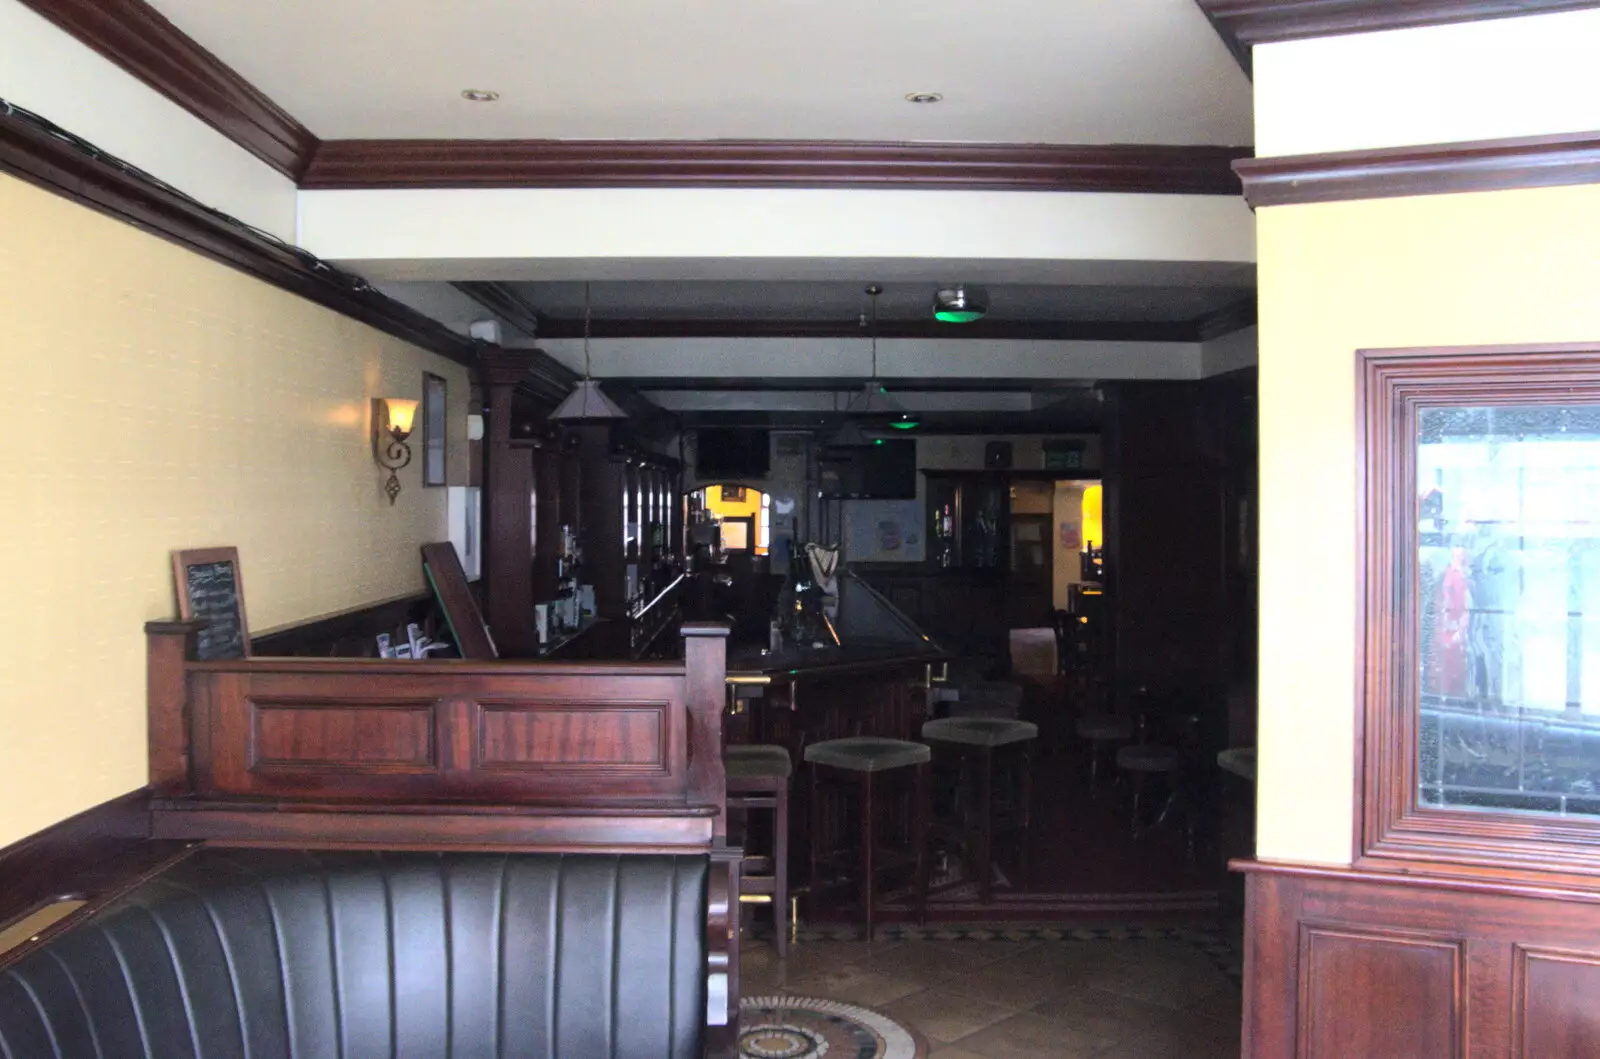 Inside the closed-up Breffni, from The End of the Breffni, Blackrock, Dublin - 18th February 2023